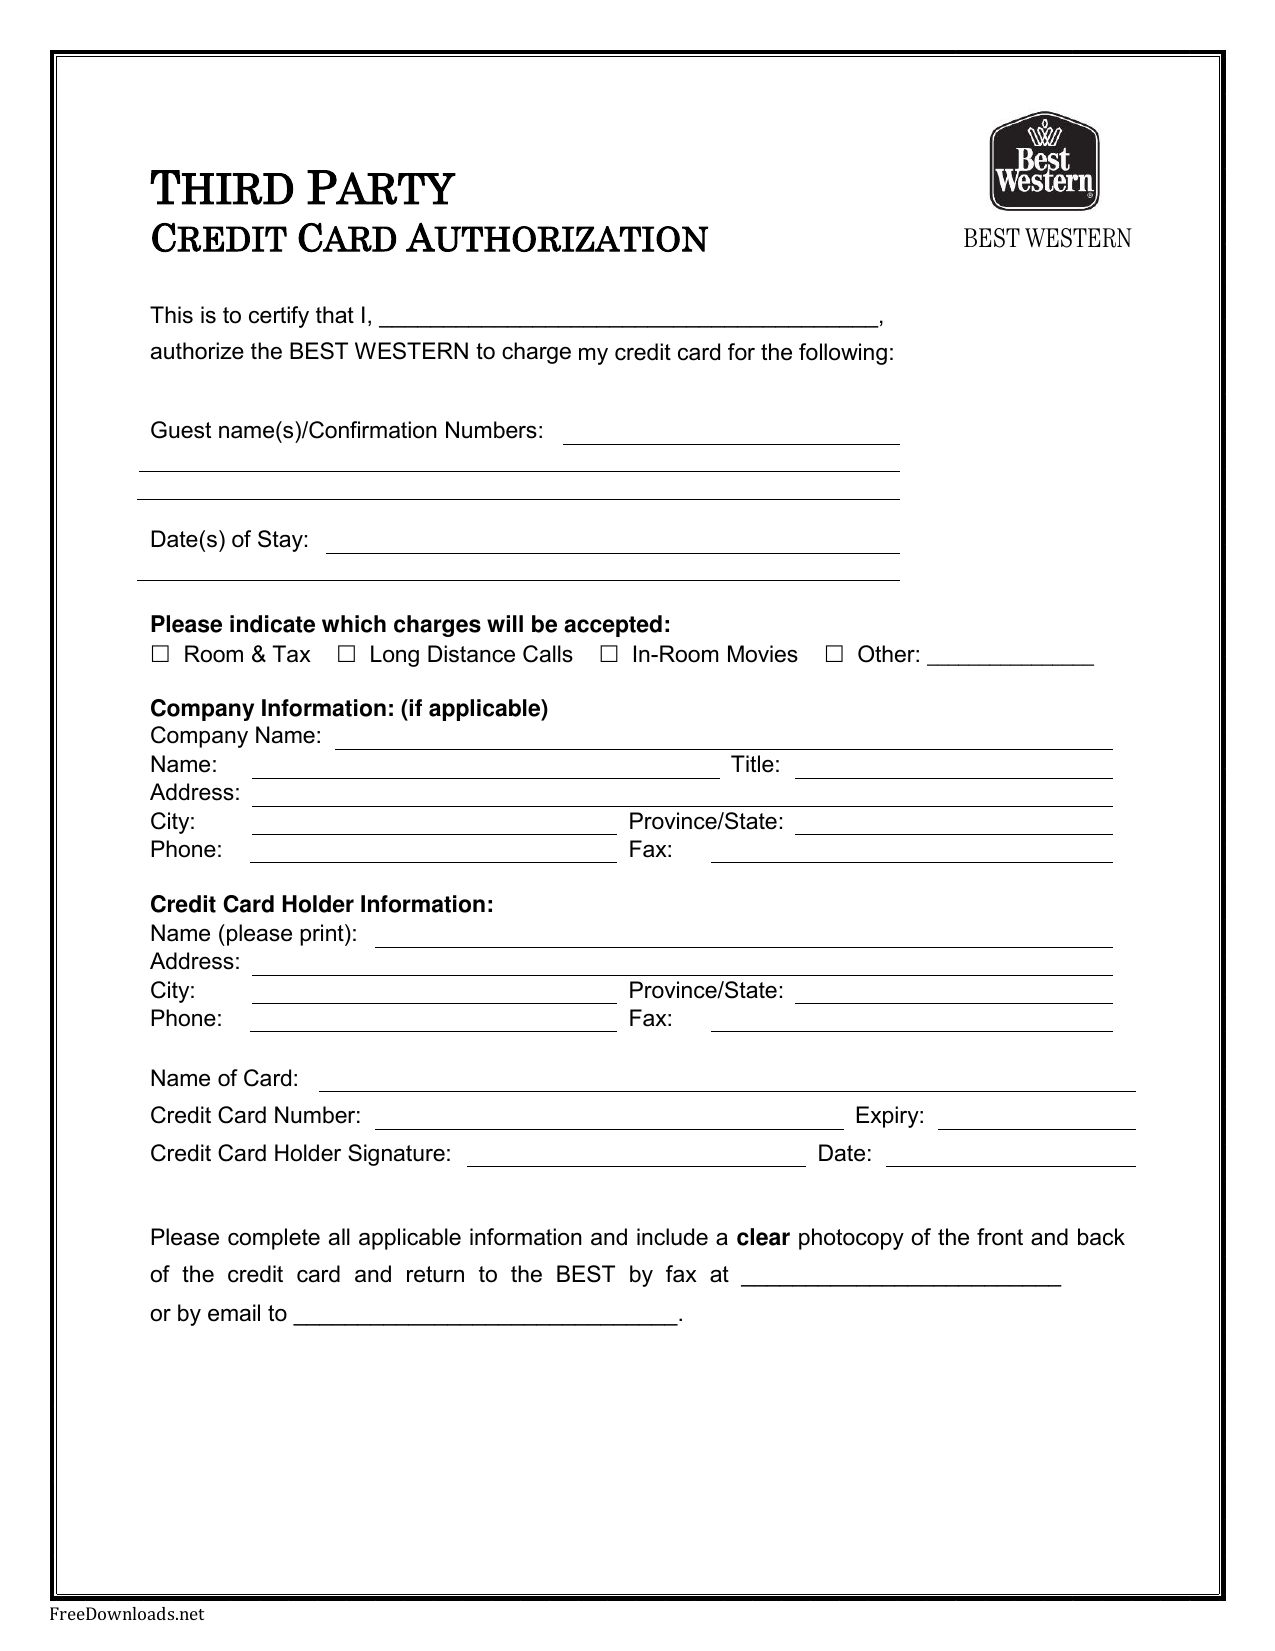 Medsolutions Prior Authorization Form Apply For Credit Card With Regard To Credit Card Authorisation Form Template Australia